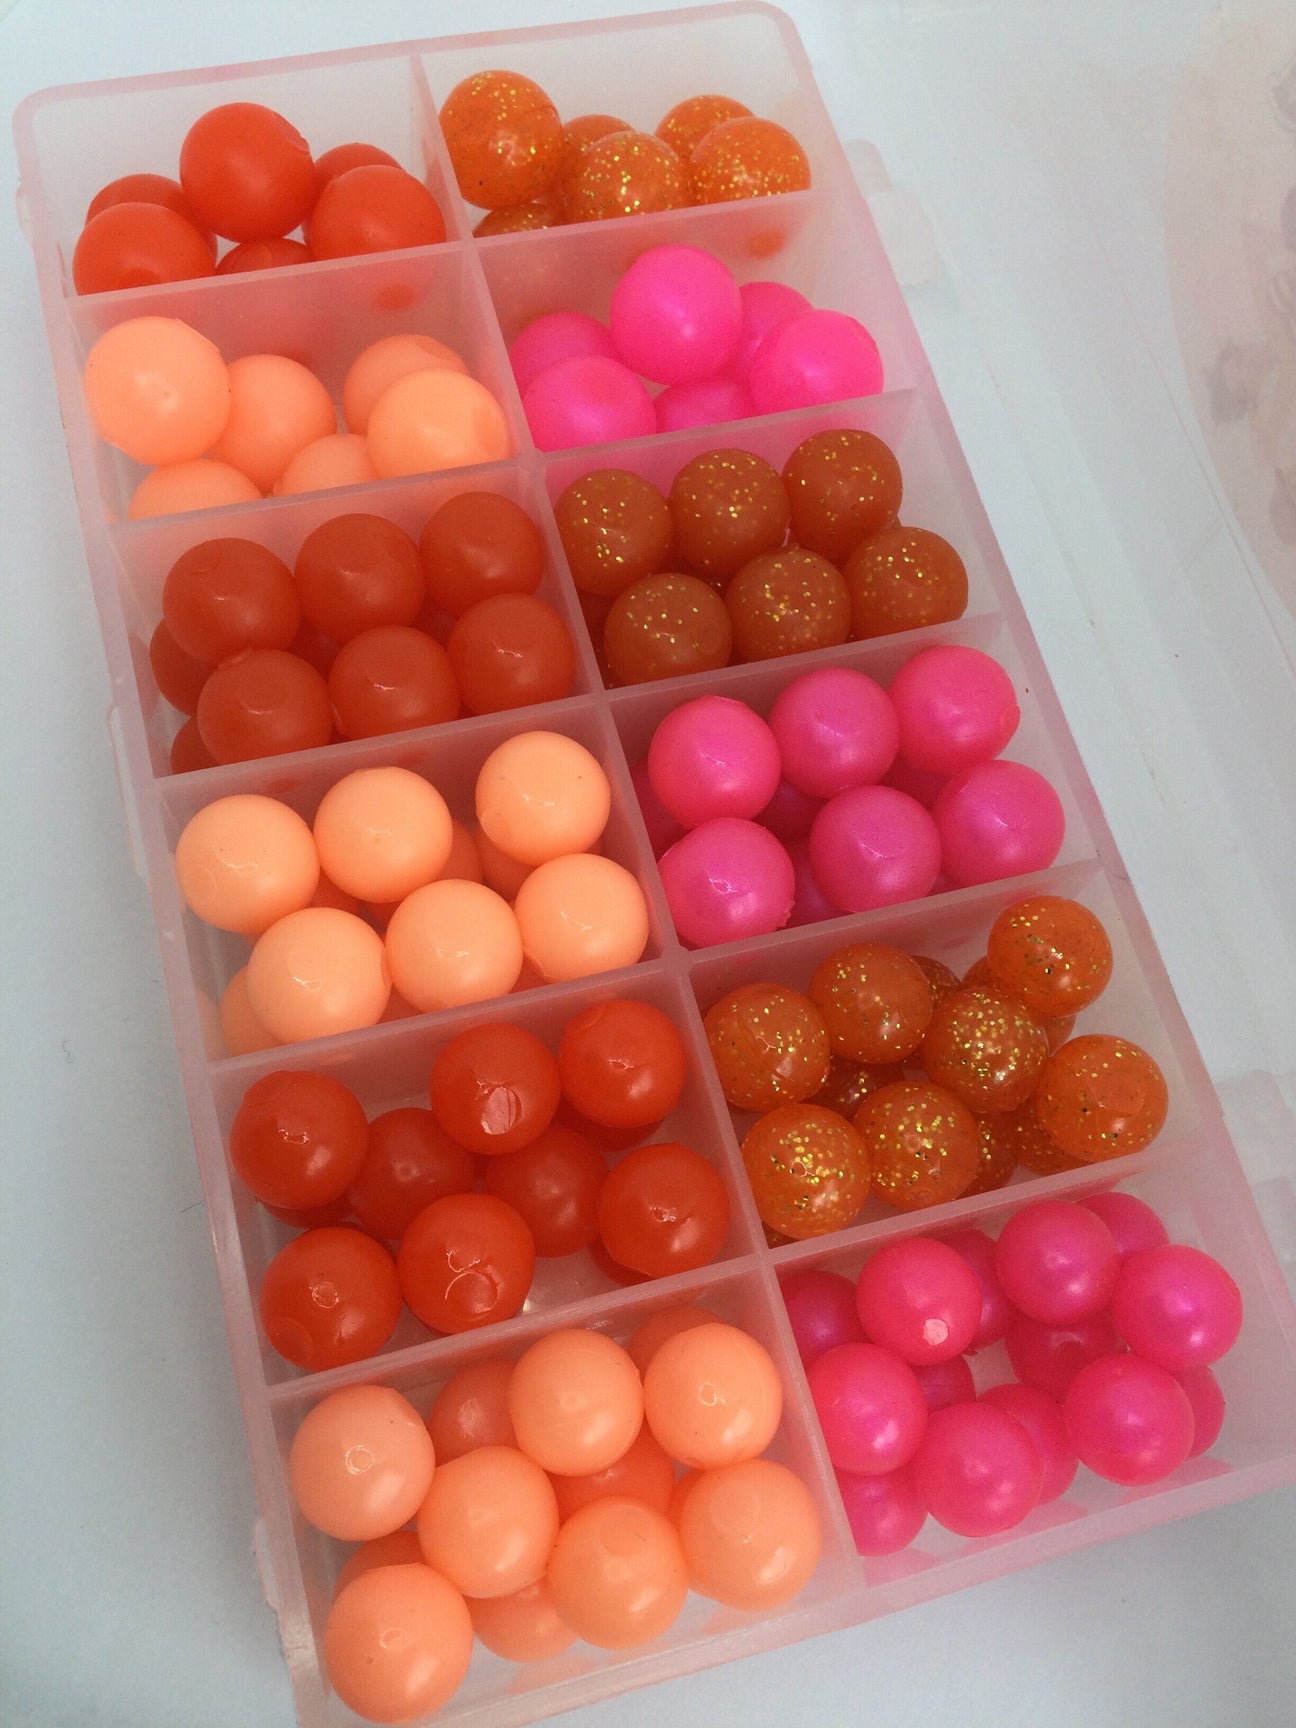 Soft plastic beads/eggs Pack #1 for Chinook Salmon